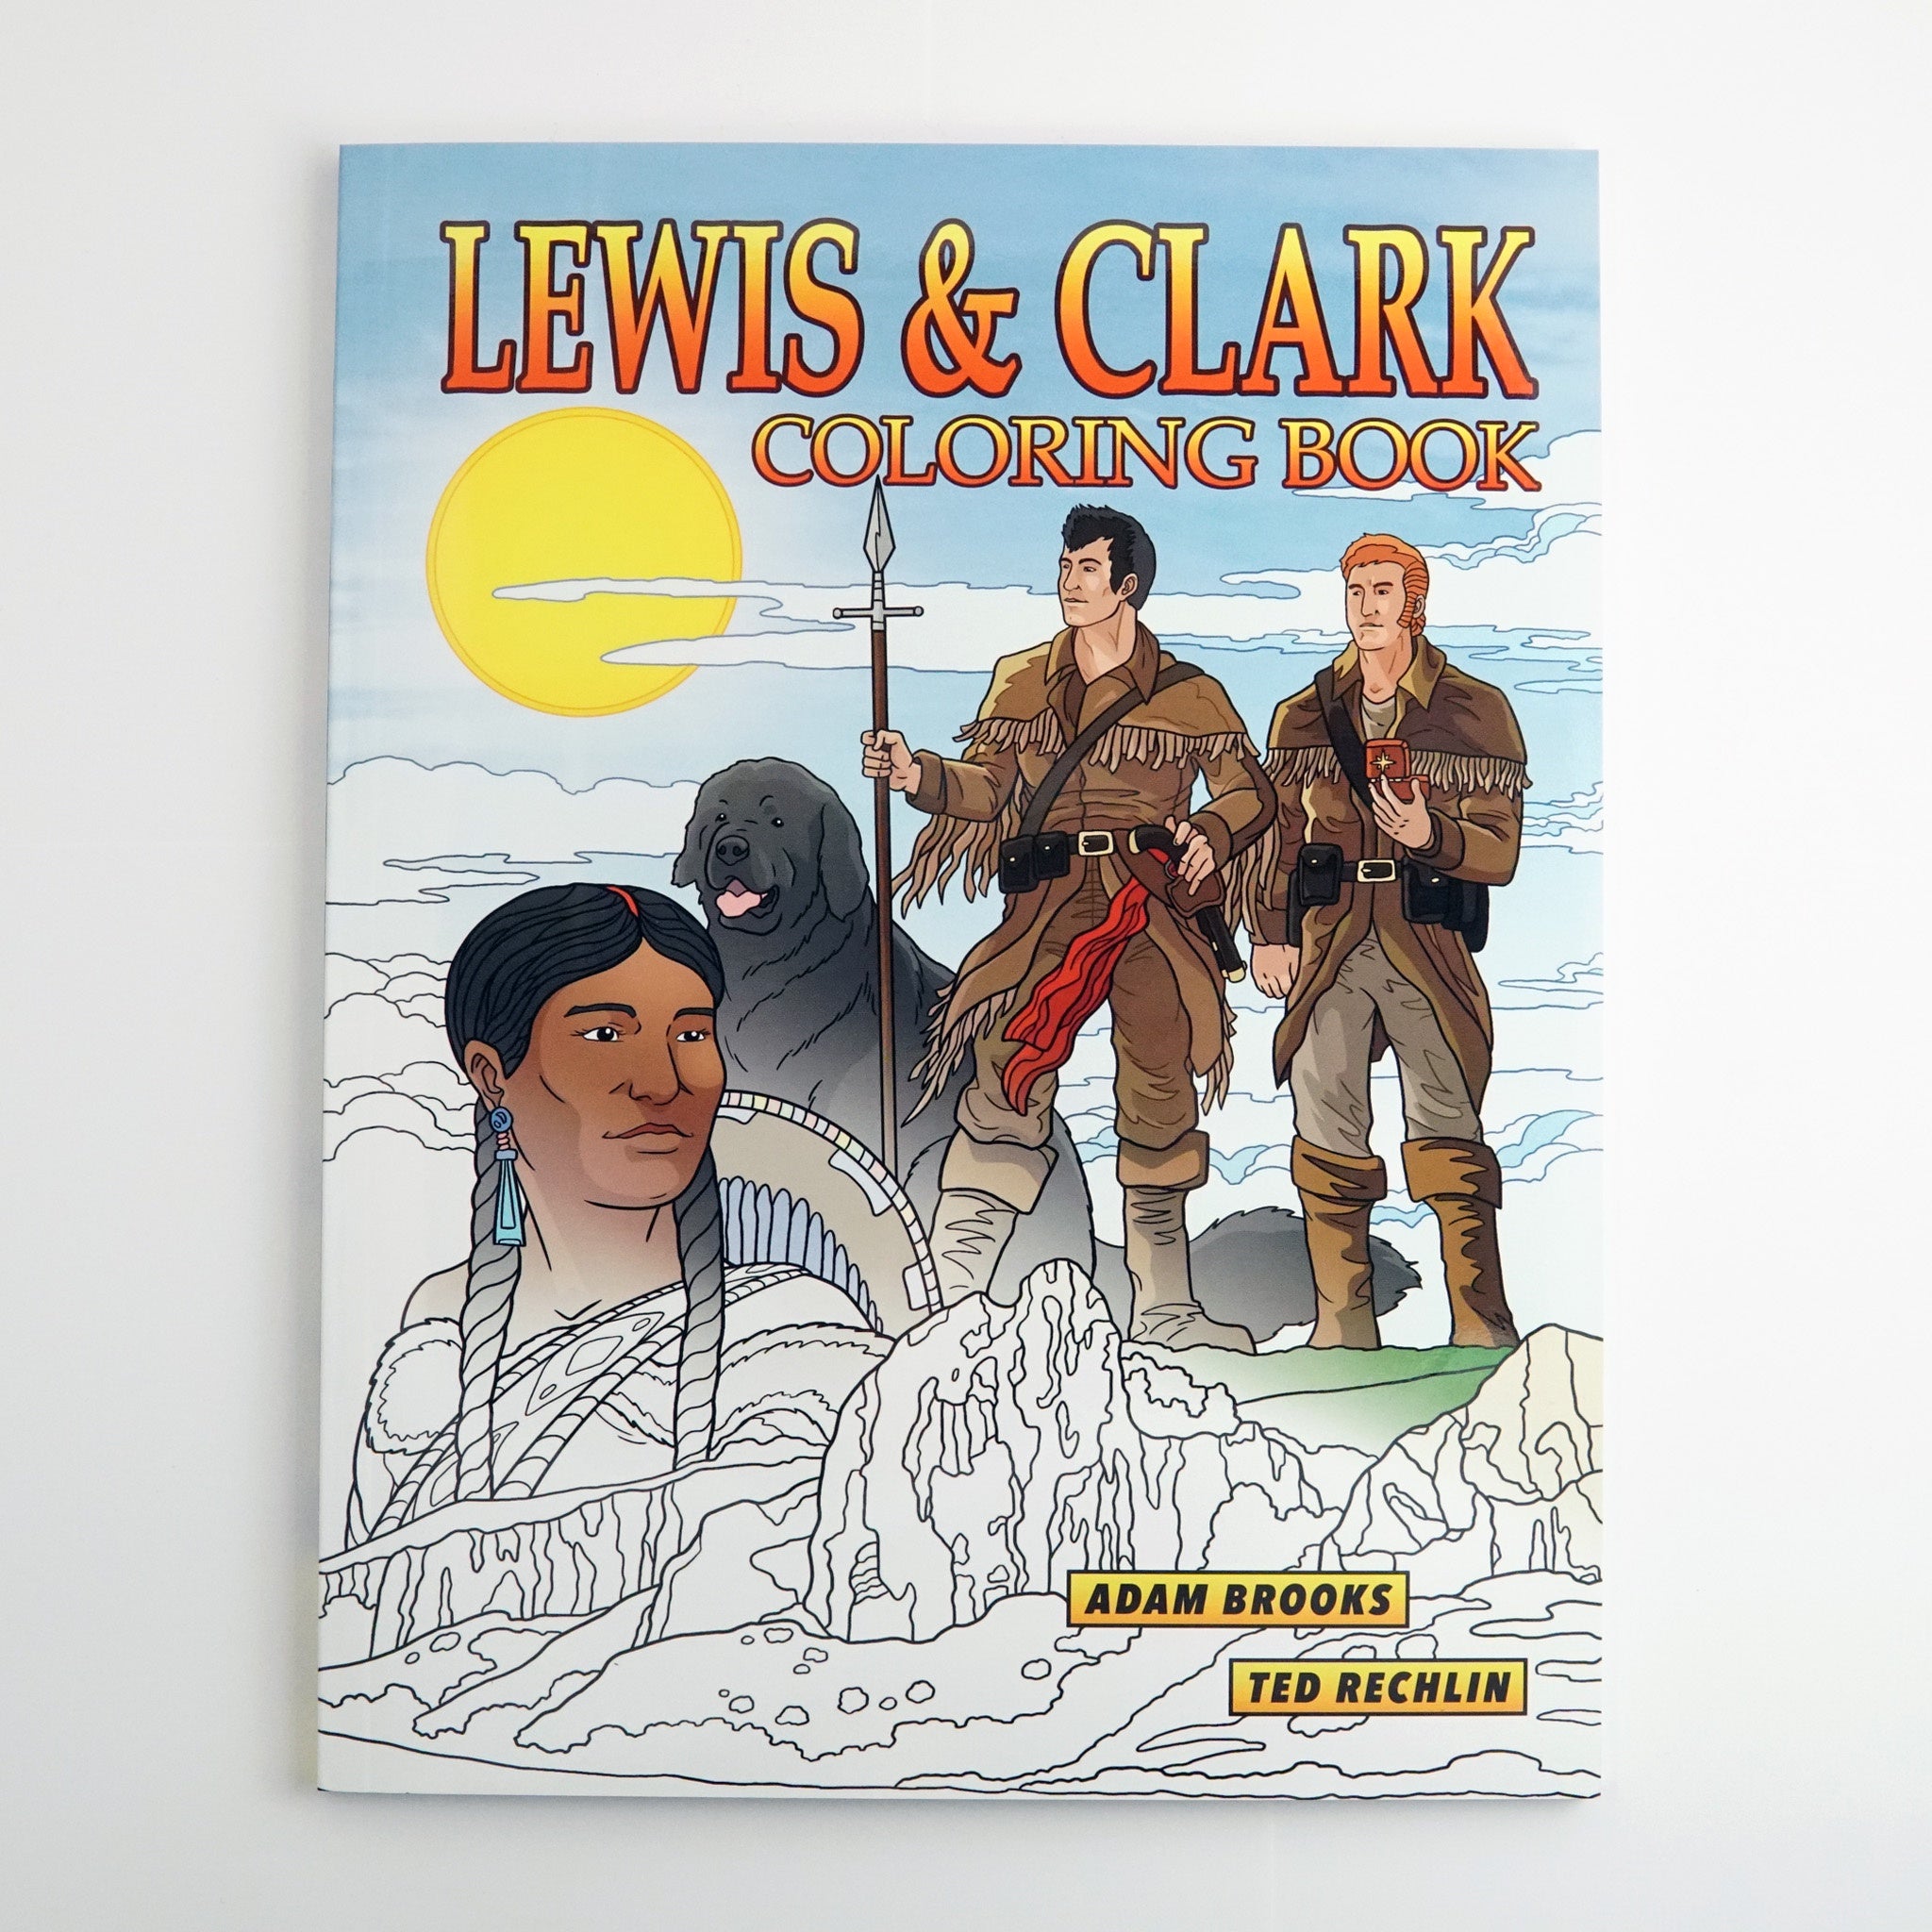 BKCL 17 LEWIS & CLARK COLORING BOOK BY A. BROOKS,  T. RECHLIN #21047281 D2 MAY23